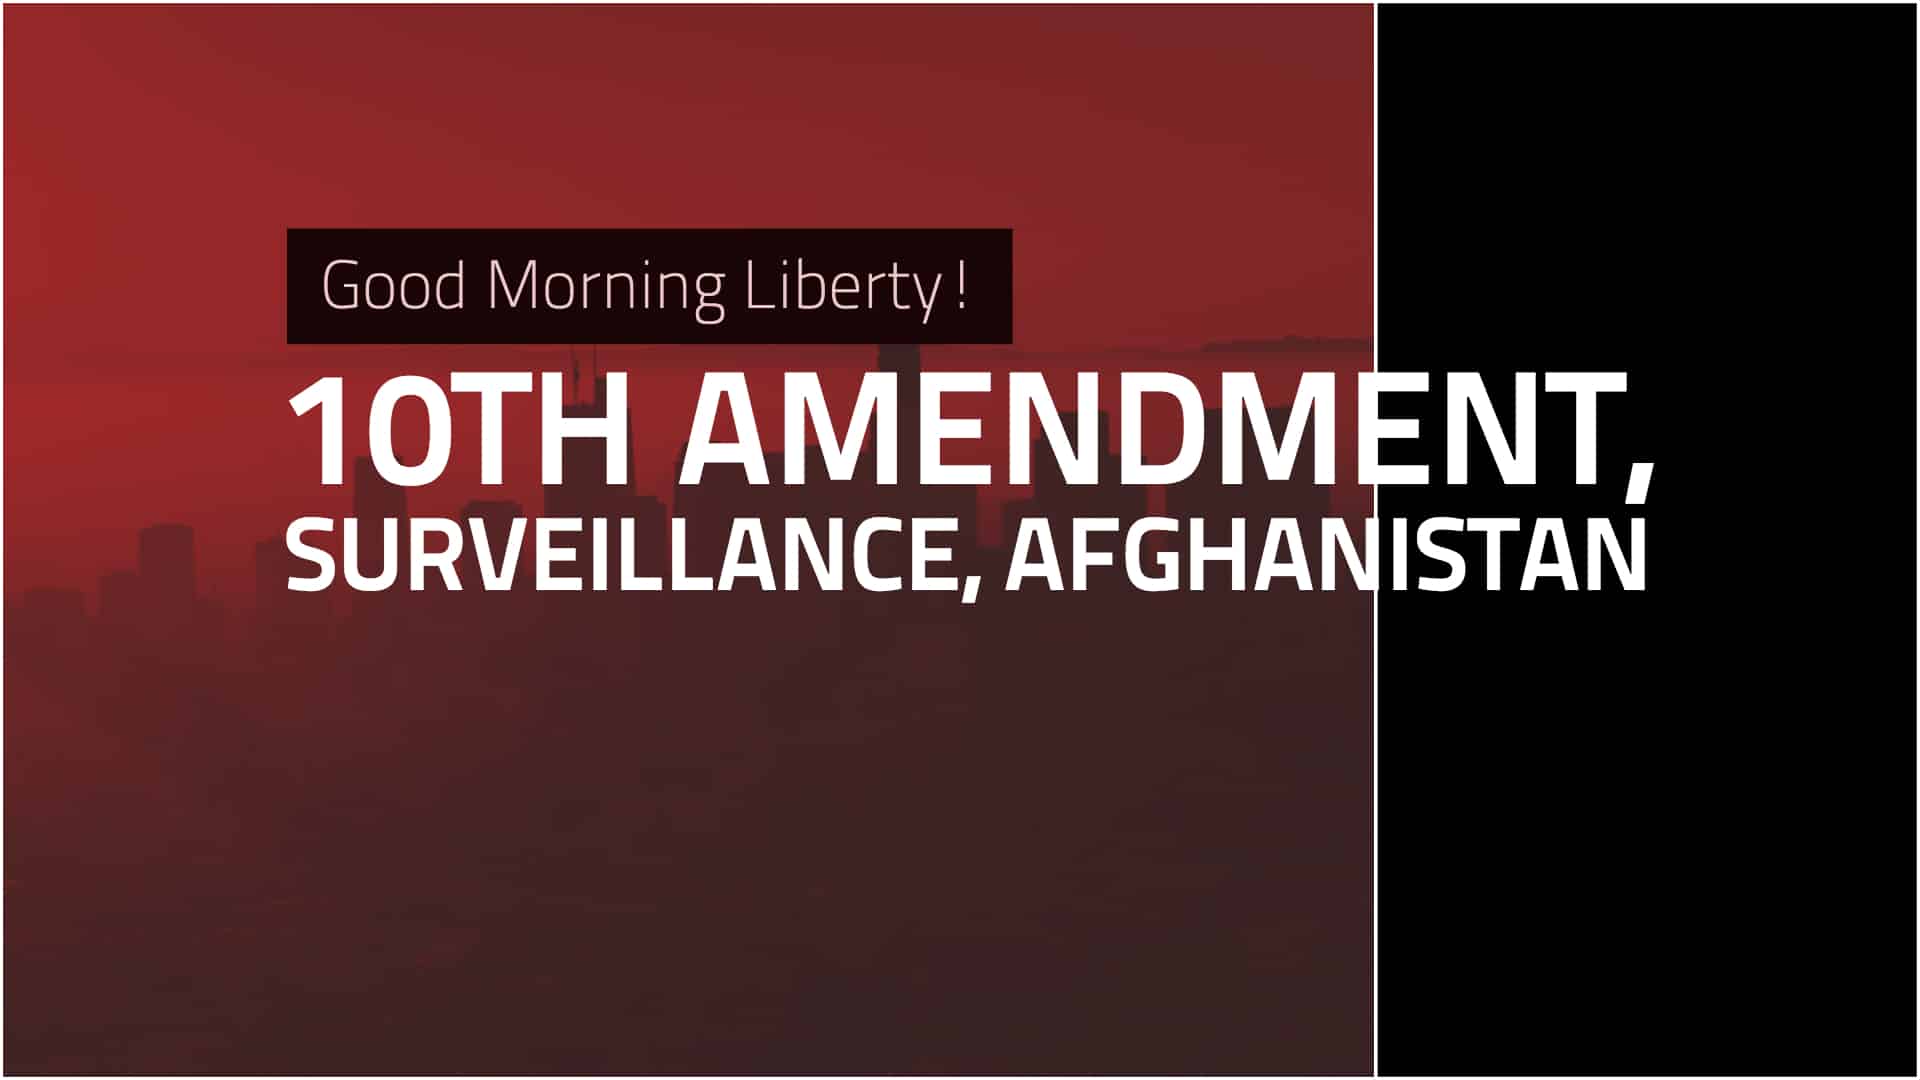 Good Morning Liberty 07-30-18: The STATES Act, Local Surveillance and War in Afghanistan